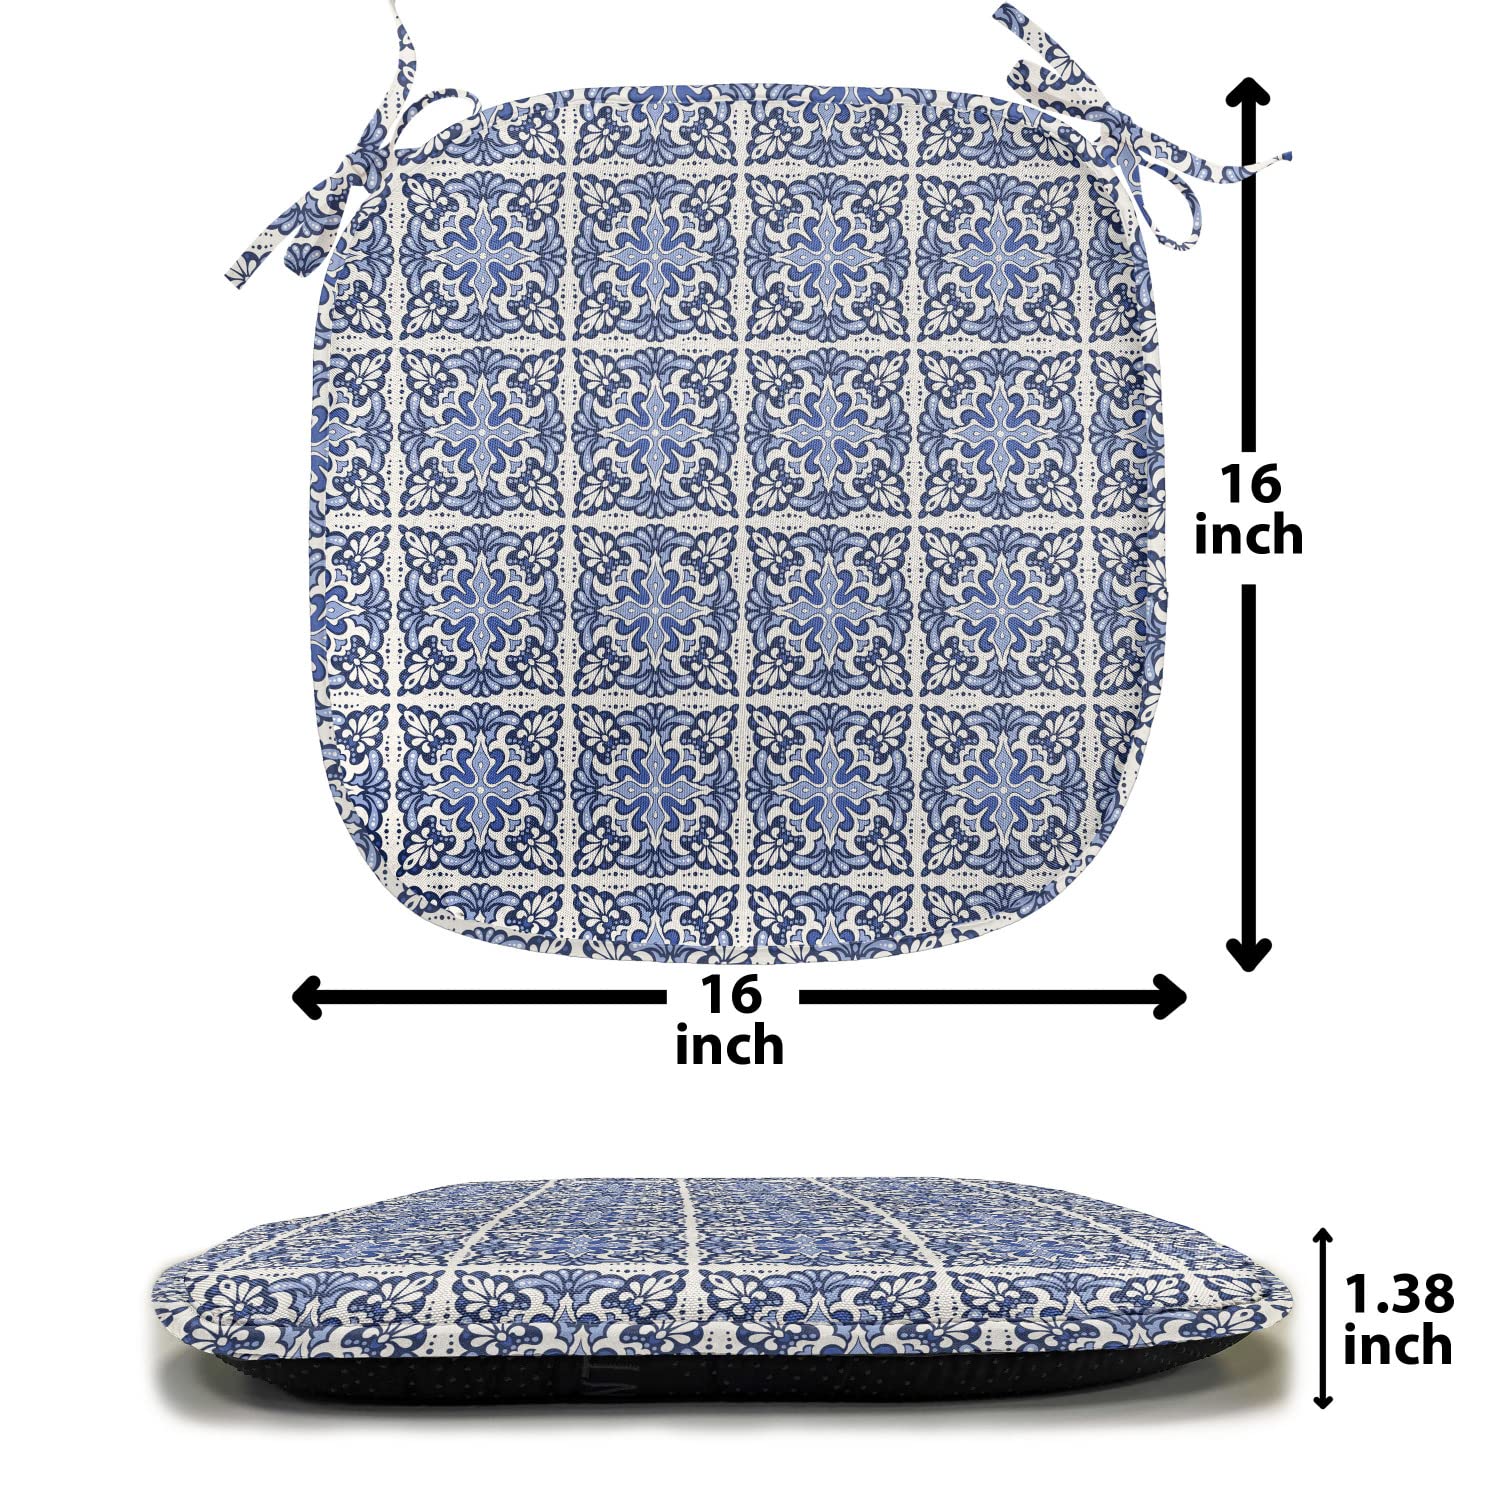 Lunarable Azulejo Chair Seating Cushion Set of 4, Ethnic Portuguese Ceramic Tiles Like Mosaic Motifs Traditional Design, Anti-Slip Seat Padding for Kitchen & Patio, 16"x16", Ivory and Lavender Blue